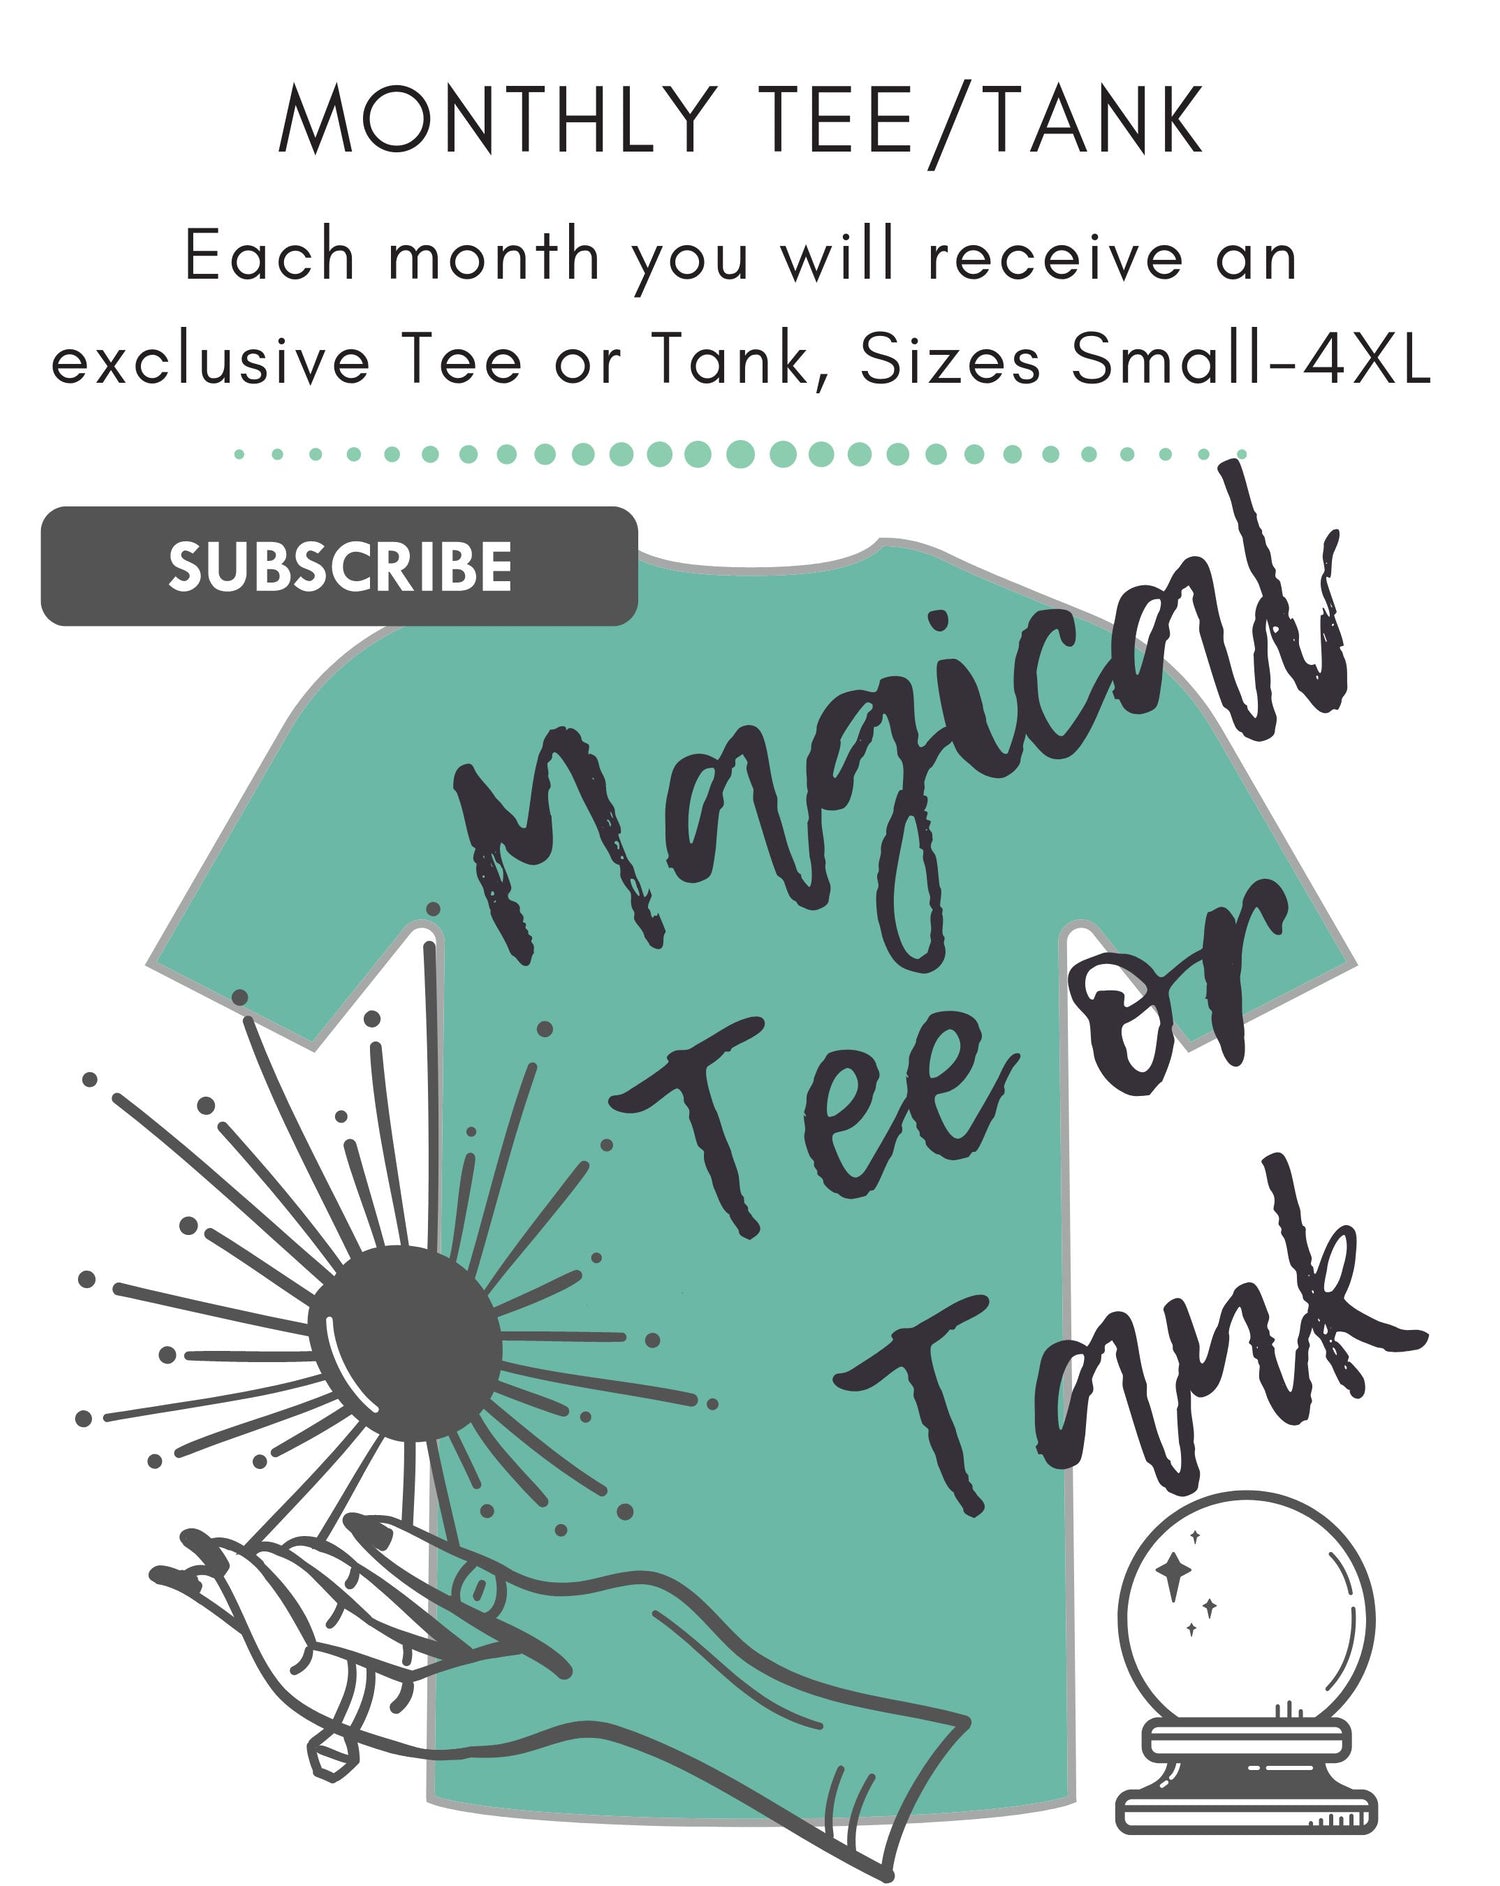 Receive our Monthly Tee/Tank!